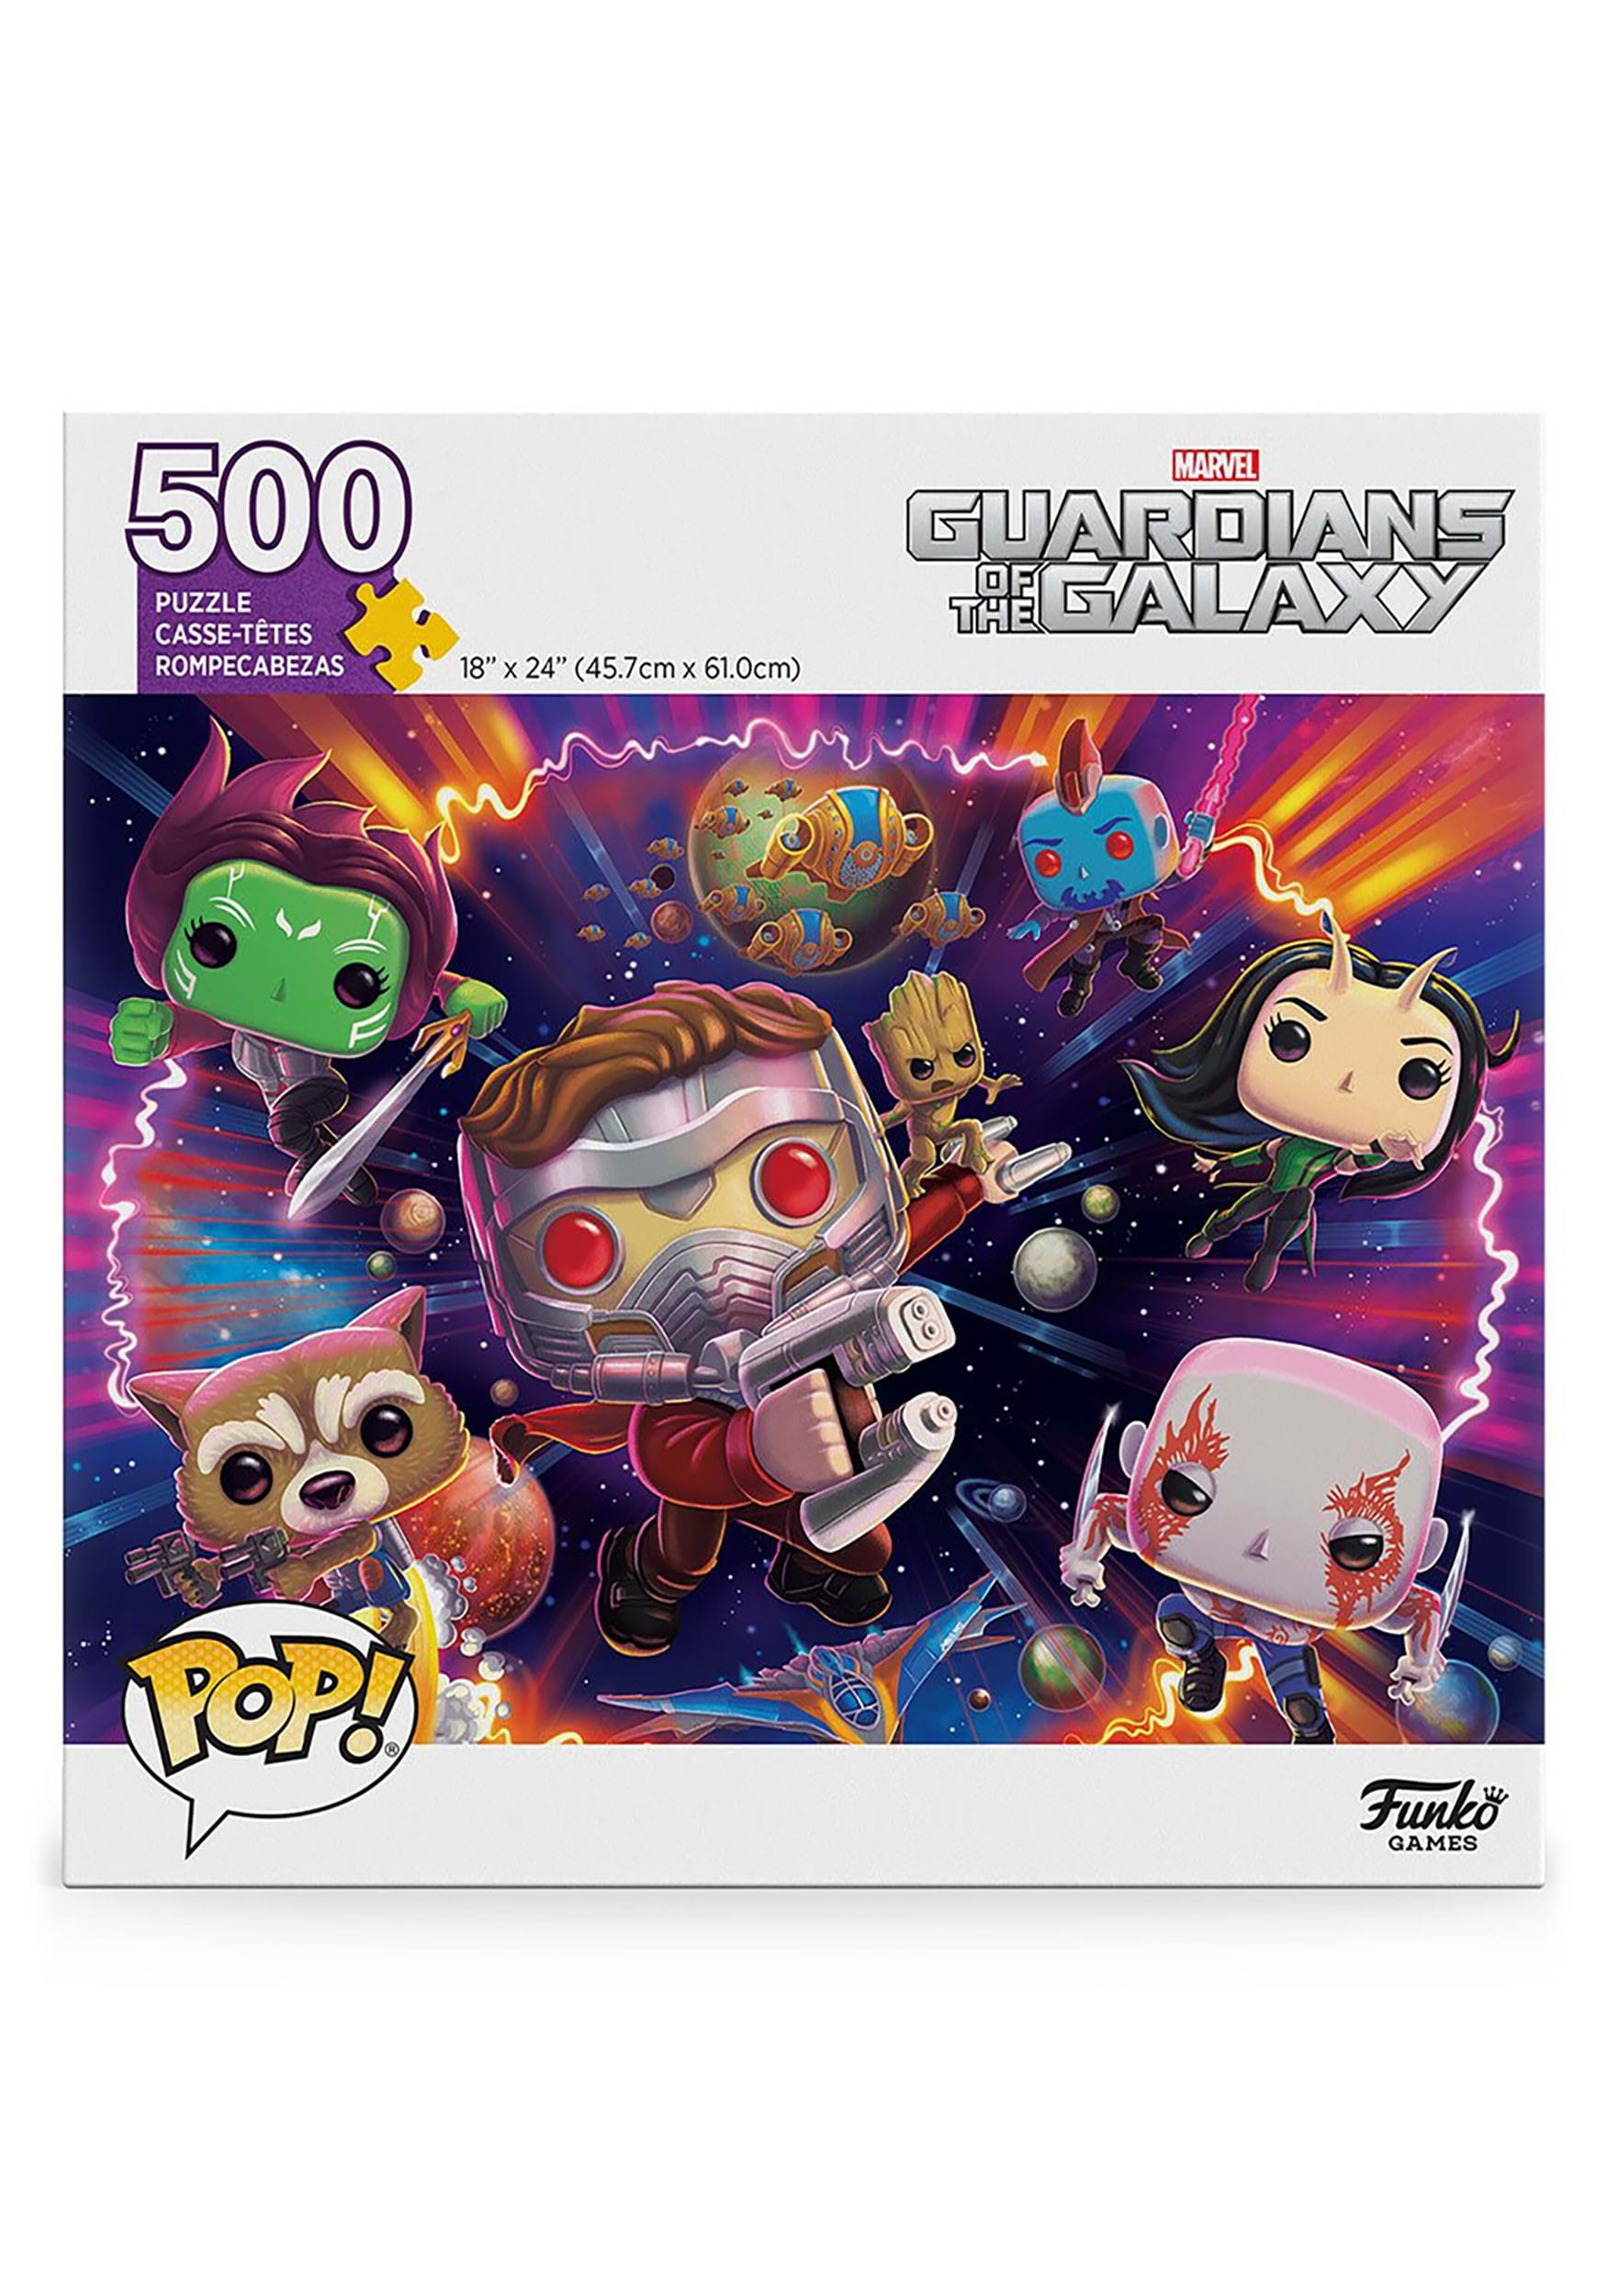 Marvel Guardians of the Galaxy POP! 500 Piece Puzzle